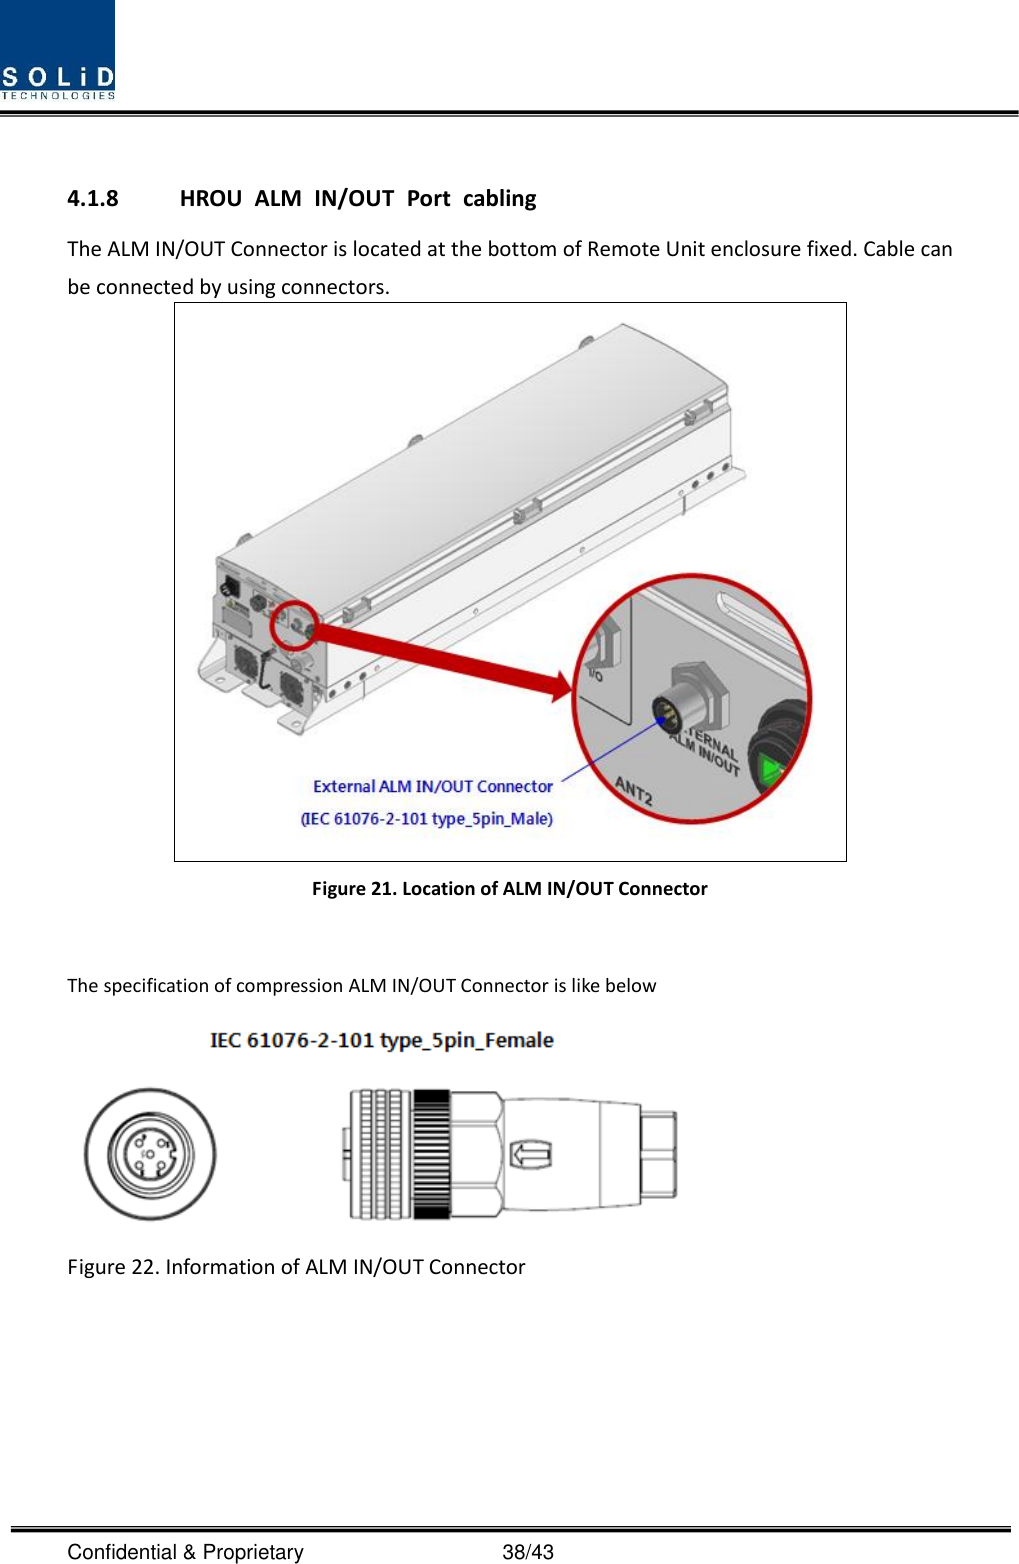  Confidential &amp; Proprietary                                      38/43  4.1.8 HROU  ALM  IN/OUT  Port  cabling The ALM IN/OUT Connector is located at the bottom of Remote Unit enclosure fixed. Cable can be connected by using connectors.  Figure 21. Location of ALM IN/OUT Connector  The specification of compression ALM IN/OUT Connector is like below  Figure 22. Information of ALM IN/OUT Connector    